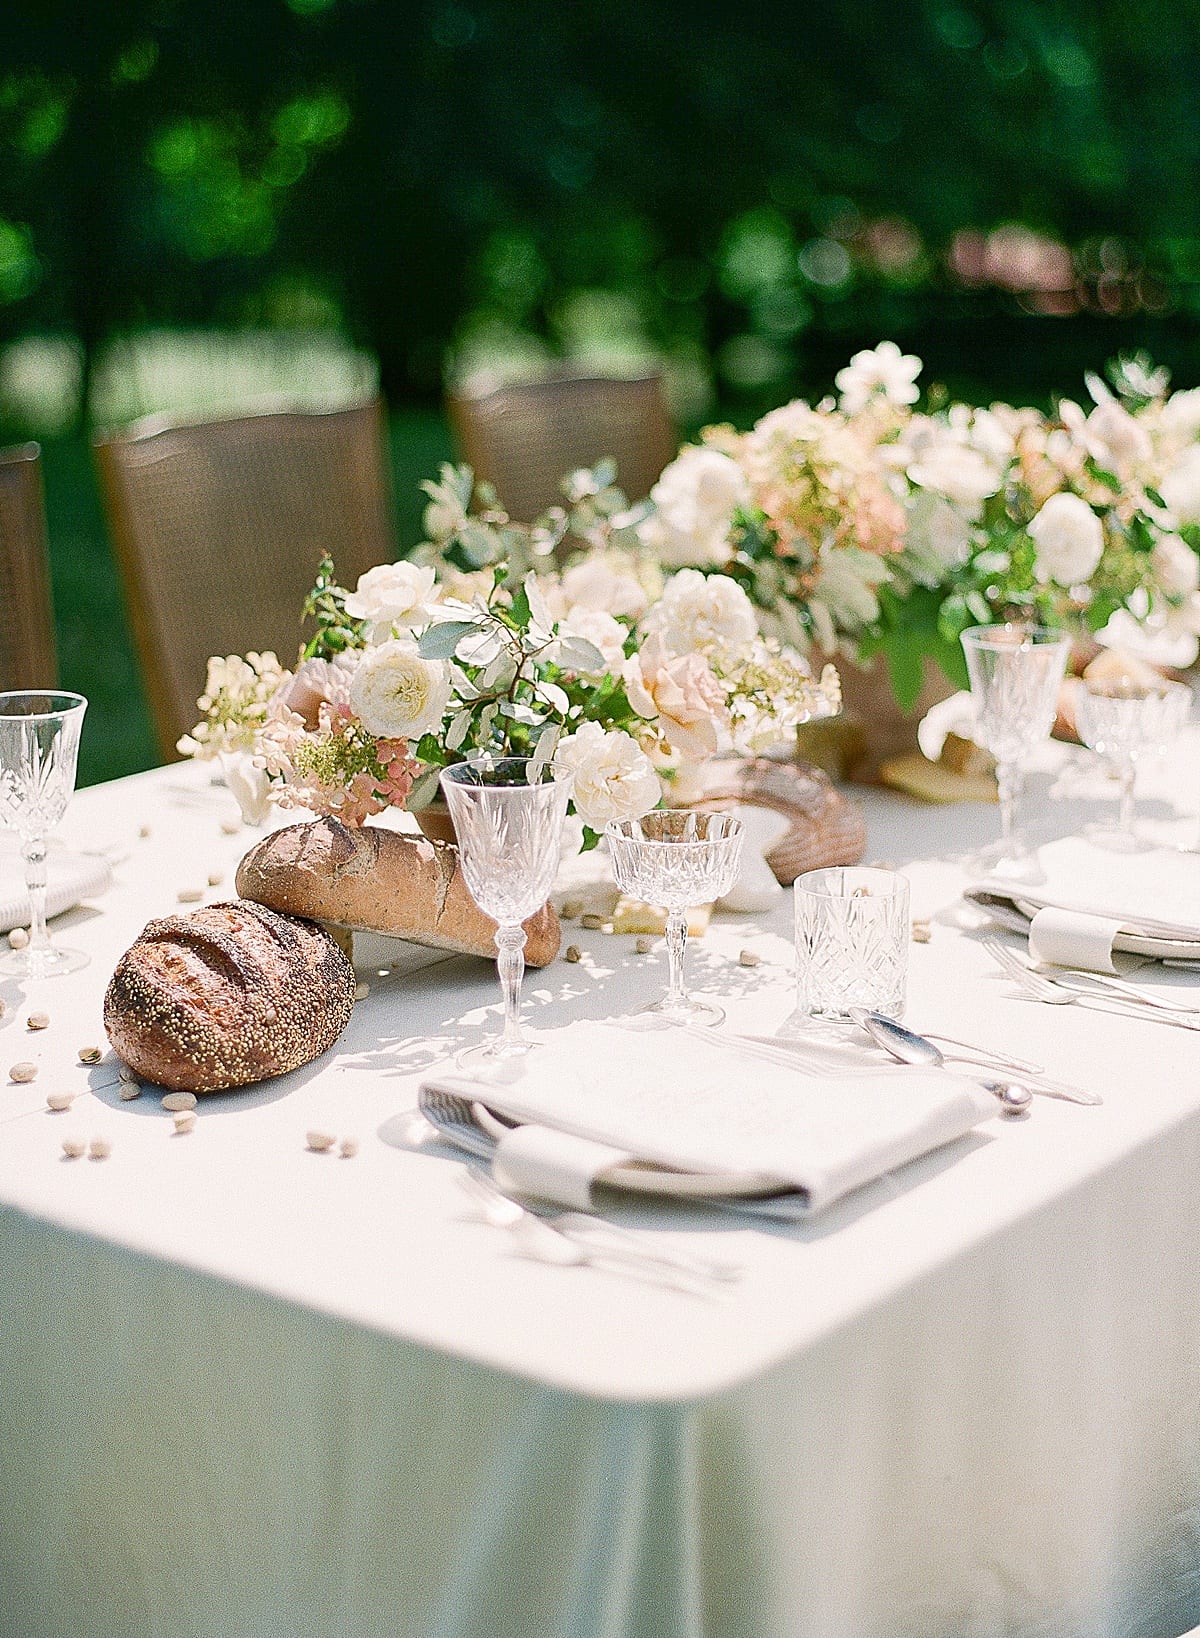 Bloomsbury Wedding Reception Table with Bread and Flowers photo